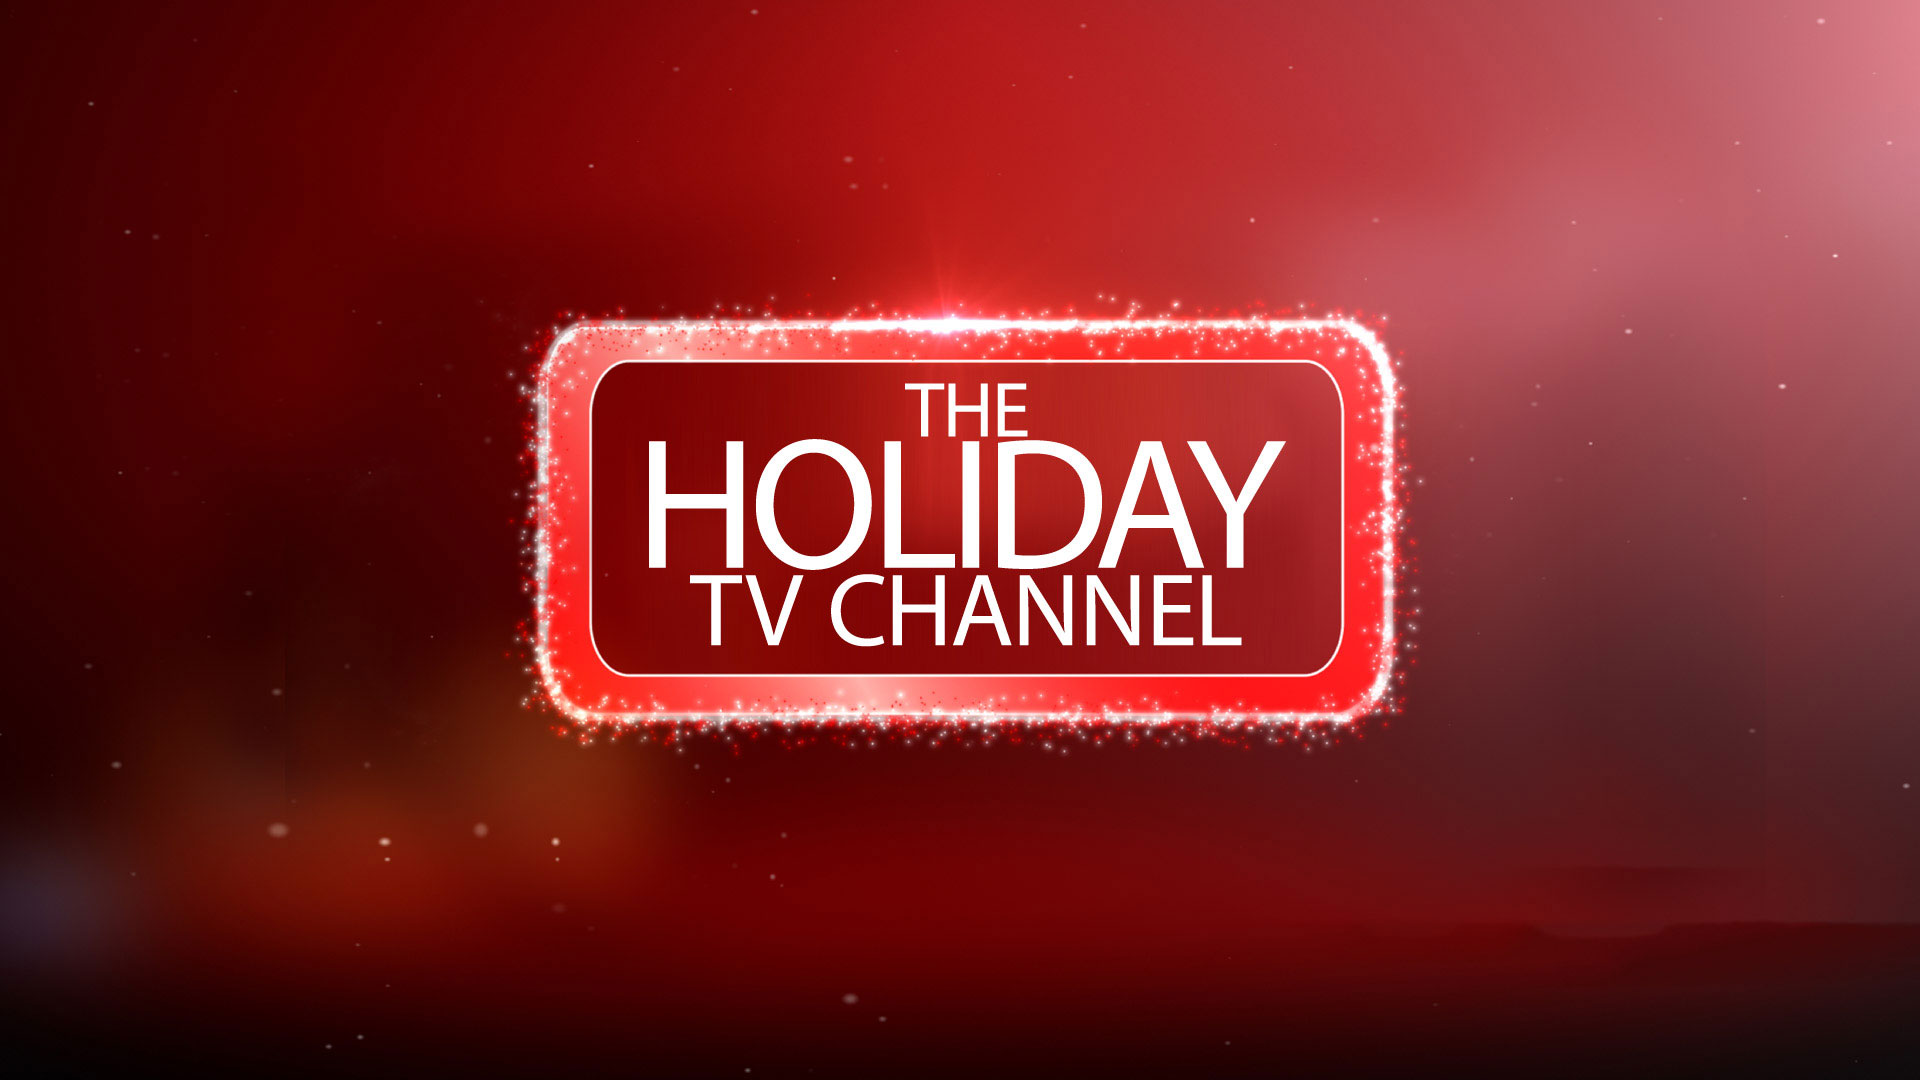 The Holiday TV Channel